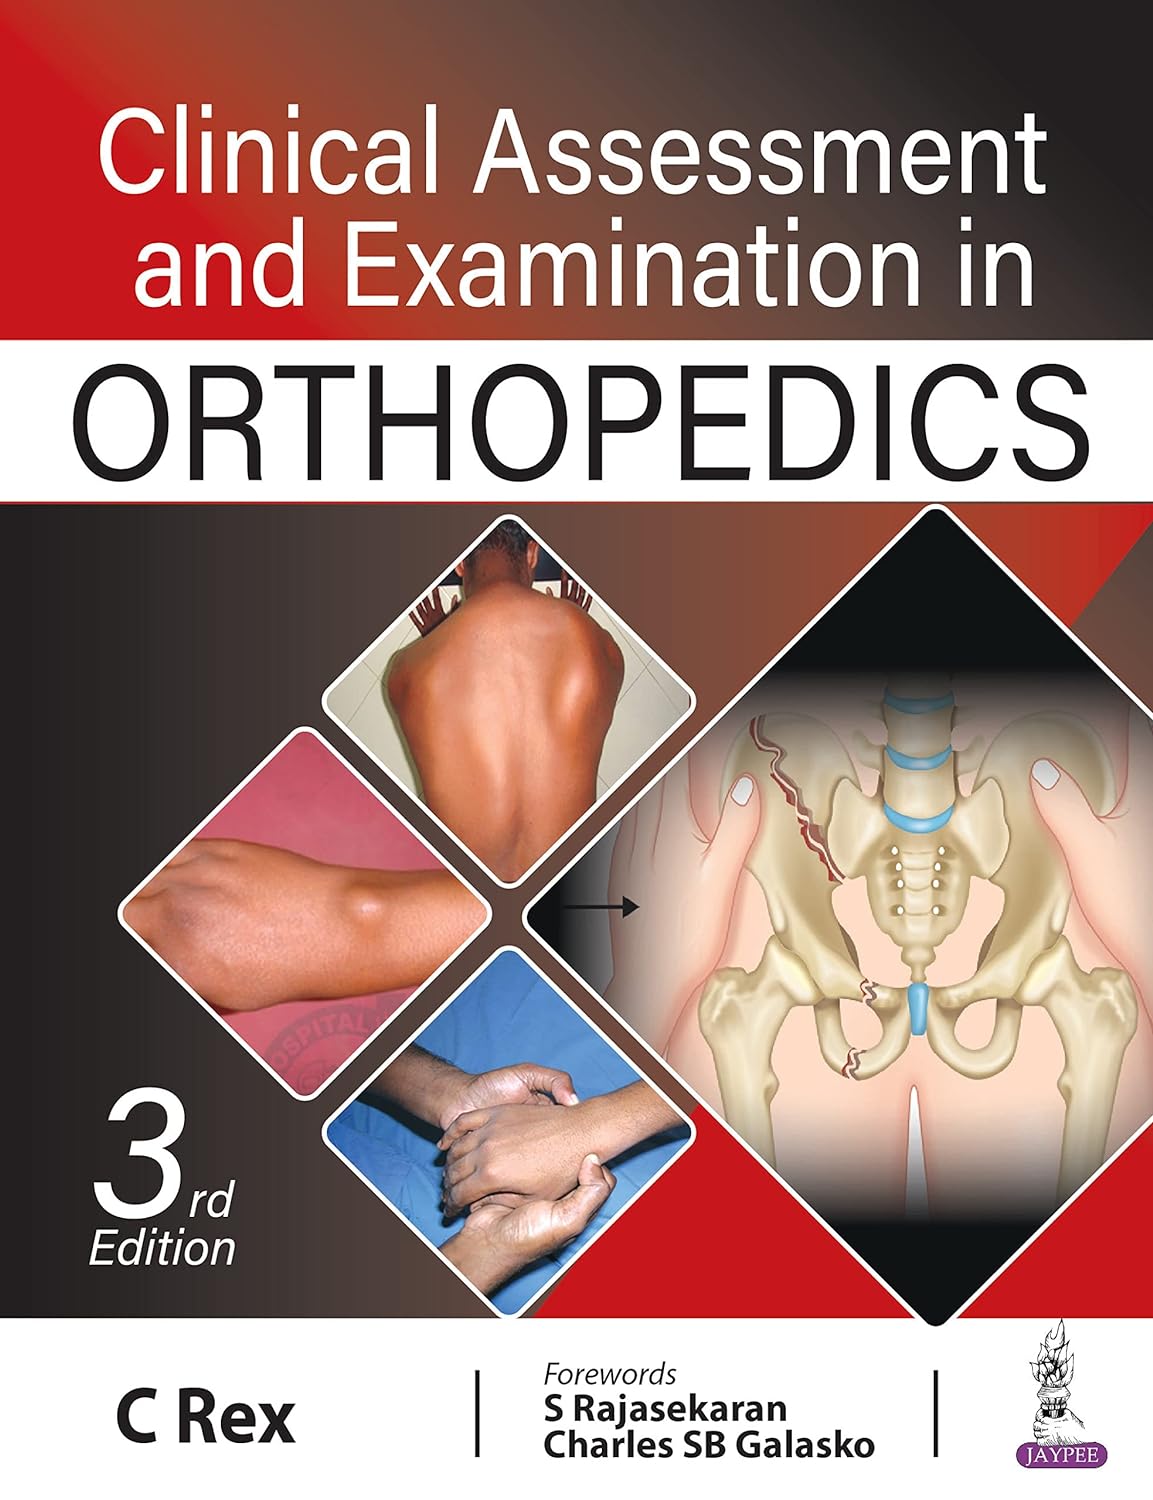 Clinical Assessment and Examination in Orthopedics 3rd Edition